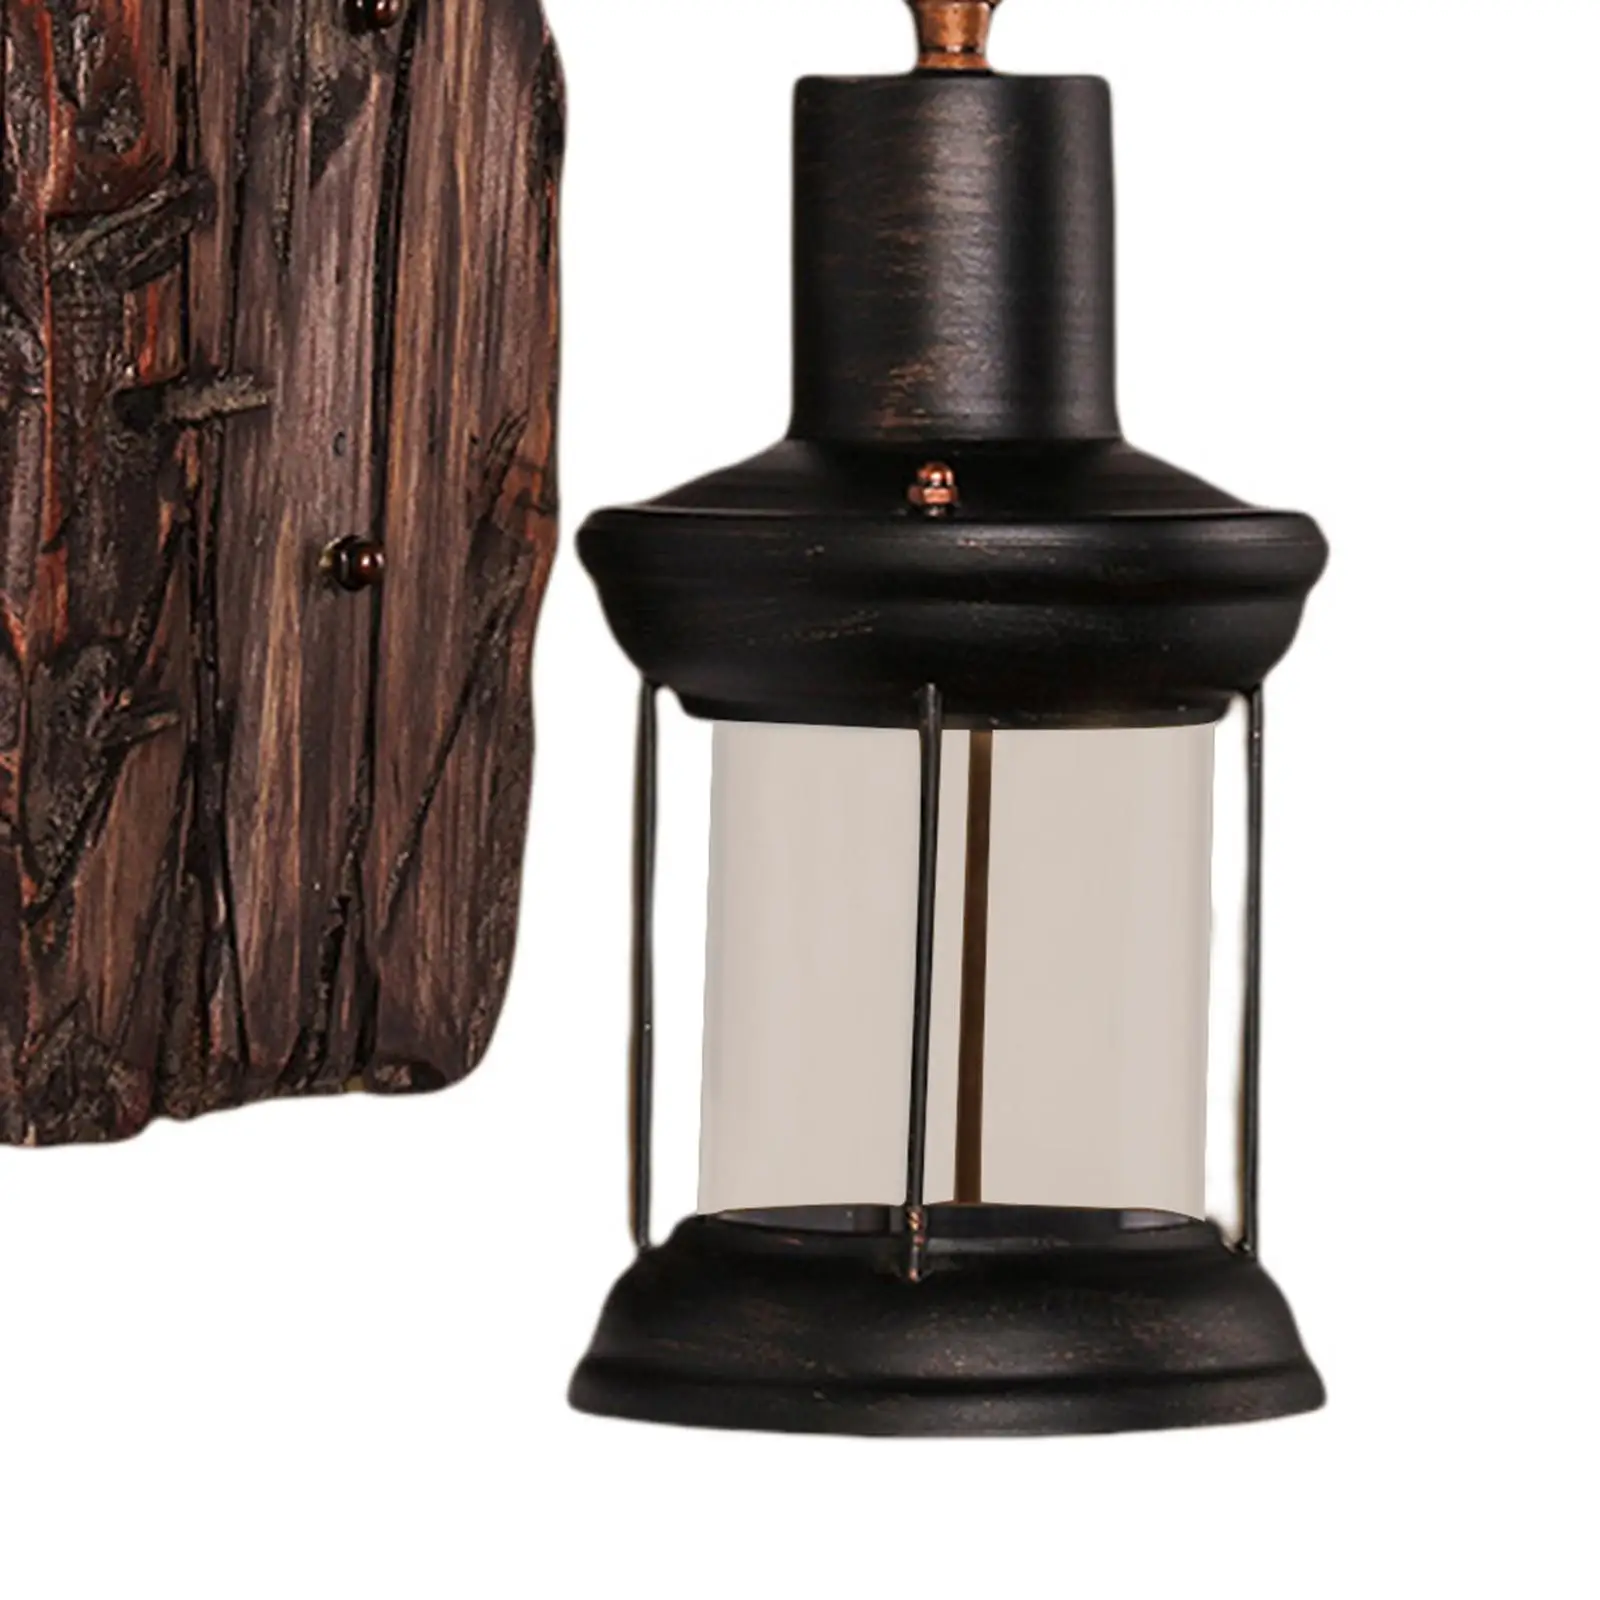  Style Industrial Wood Wall Sconce 27 Fixture Decorate Wall Lamp Glass Shade  for Restaurant